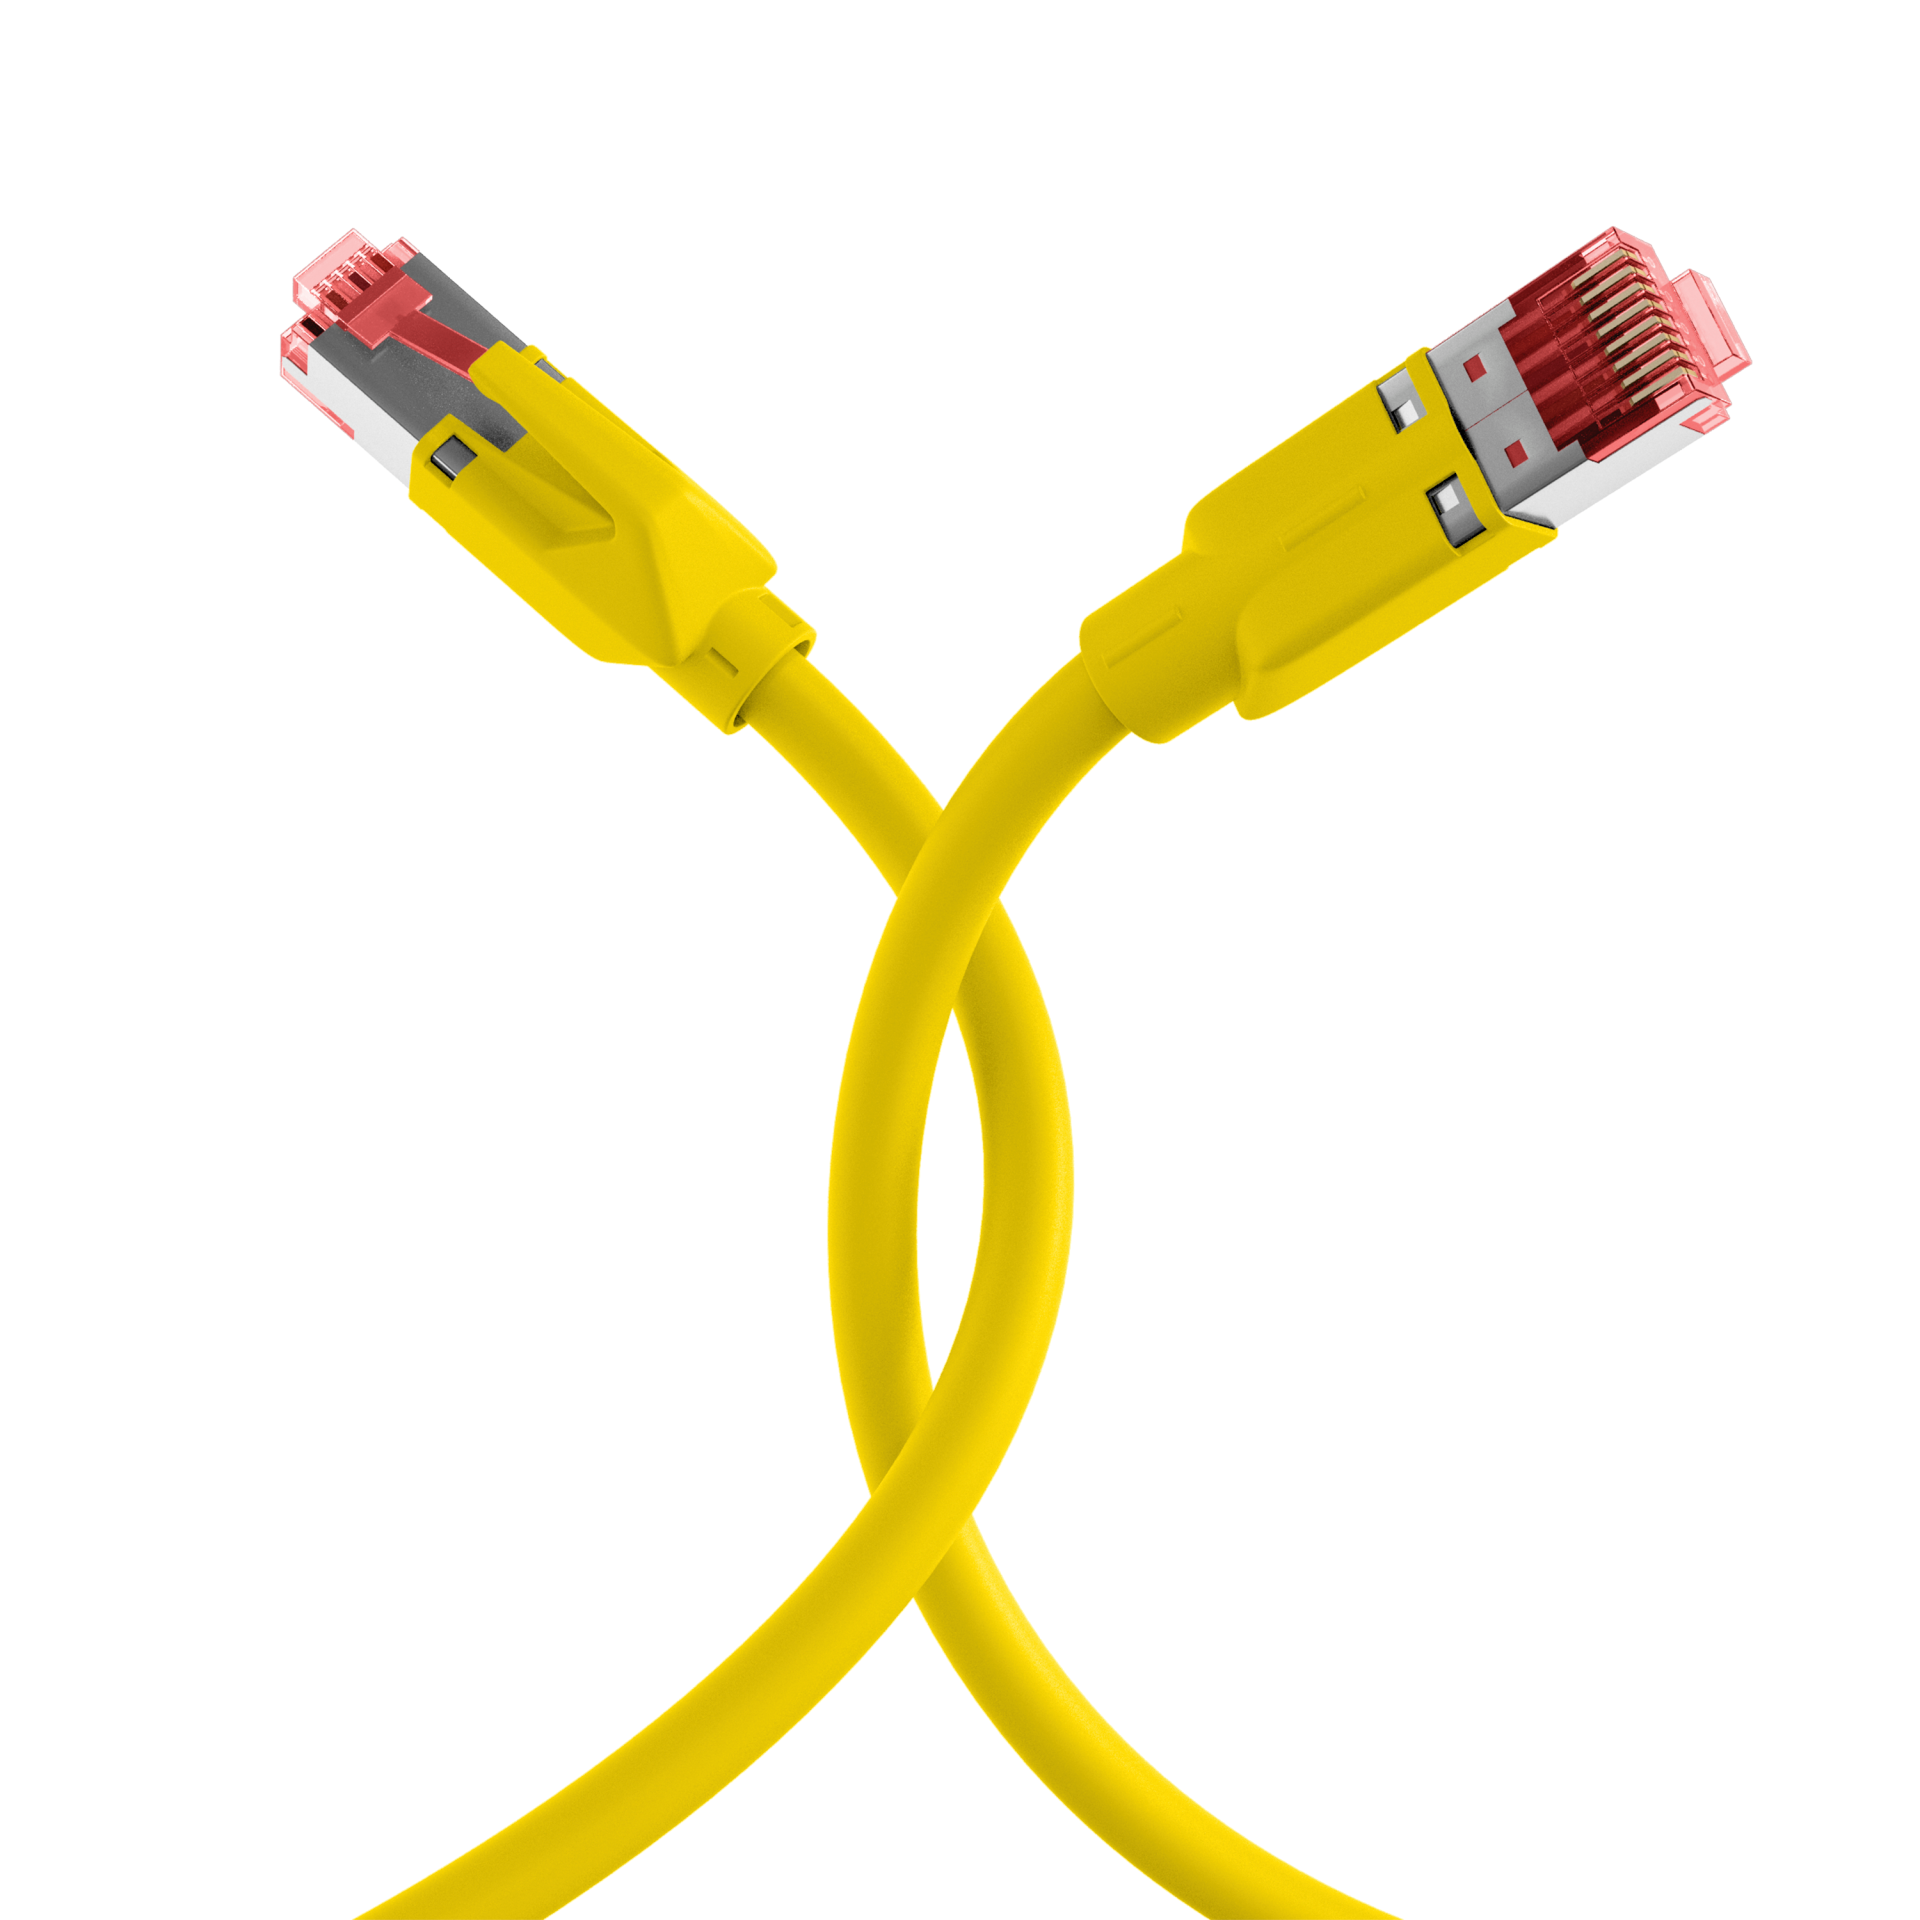 RJ45 Patch Cord Cat.5e SF/UTP PURTM21 for drag chains yellow 6m